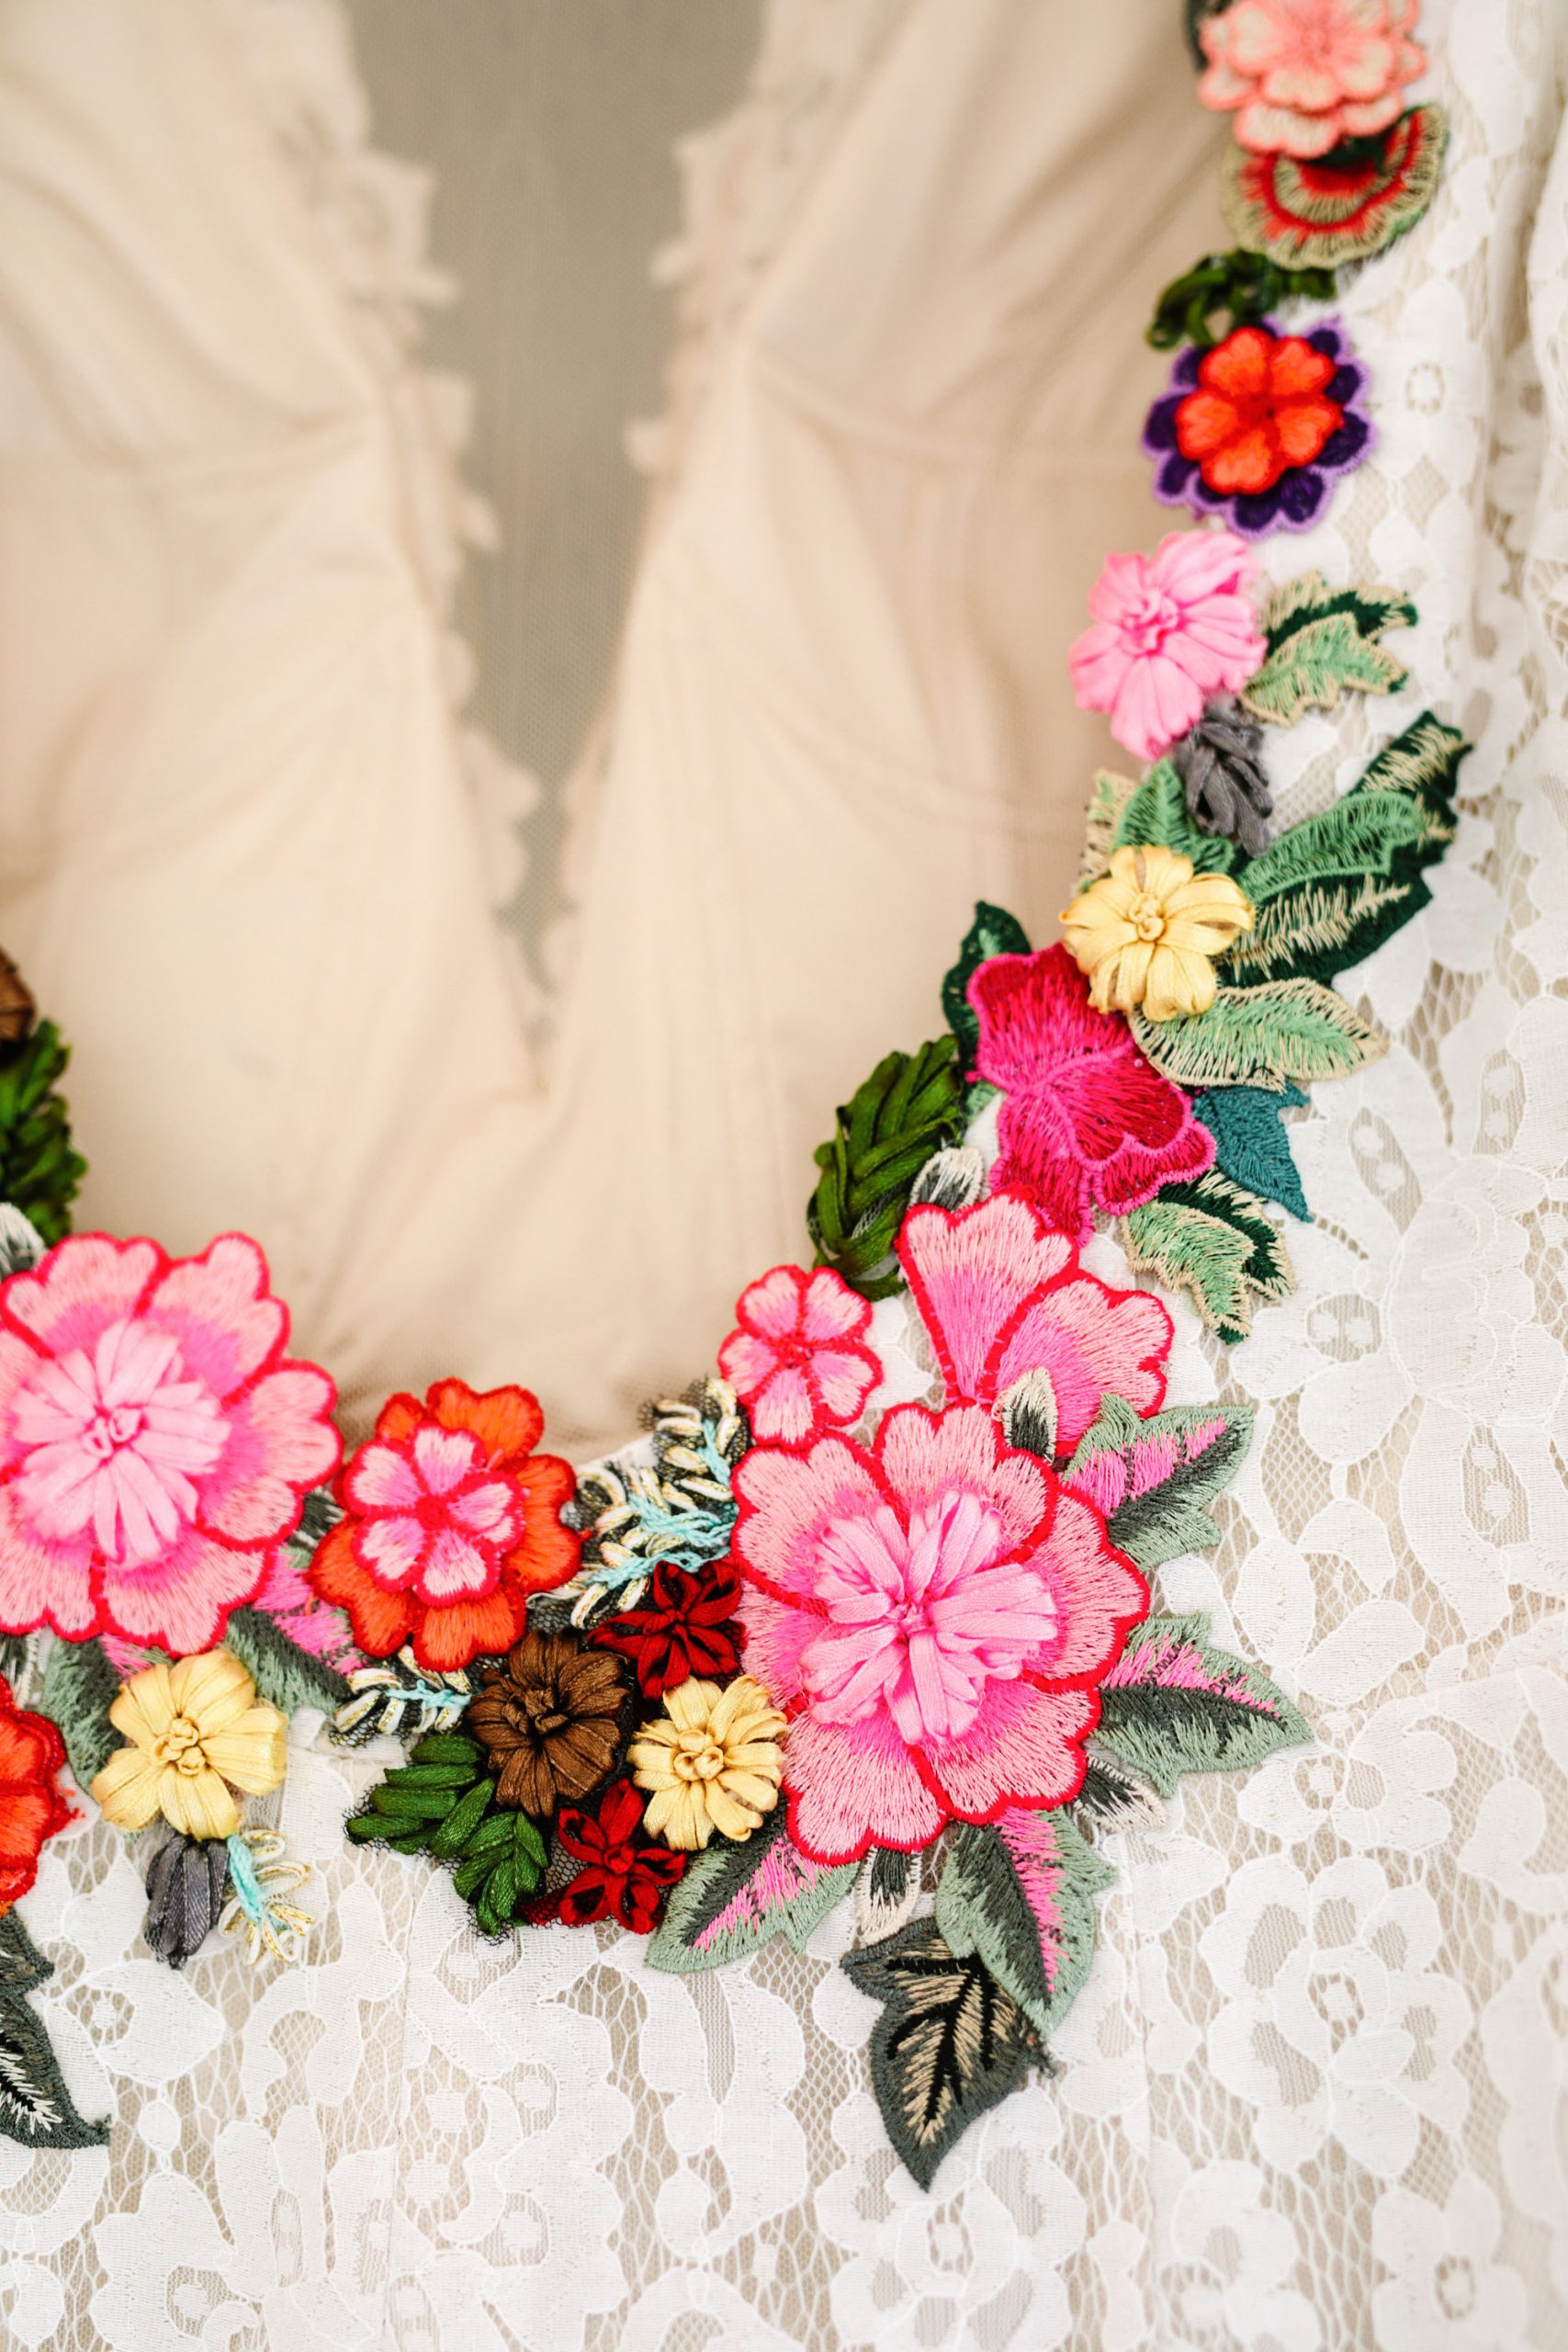 Custom bridal gown with colorful embroidered flowers by Heirloom Bride - www.marycostaweddings.com